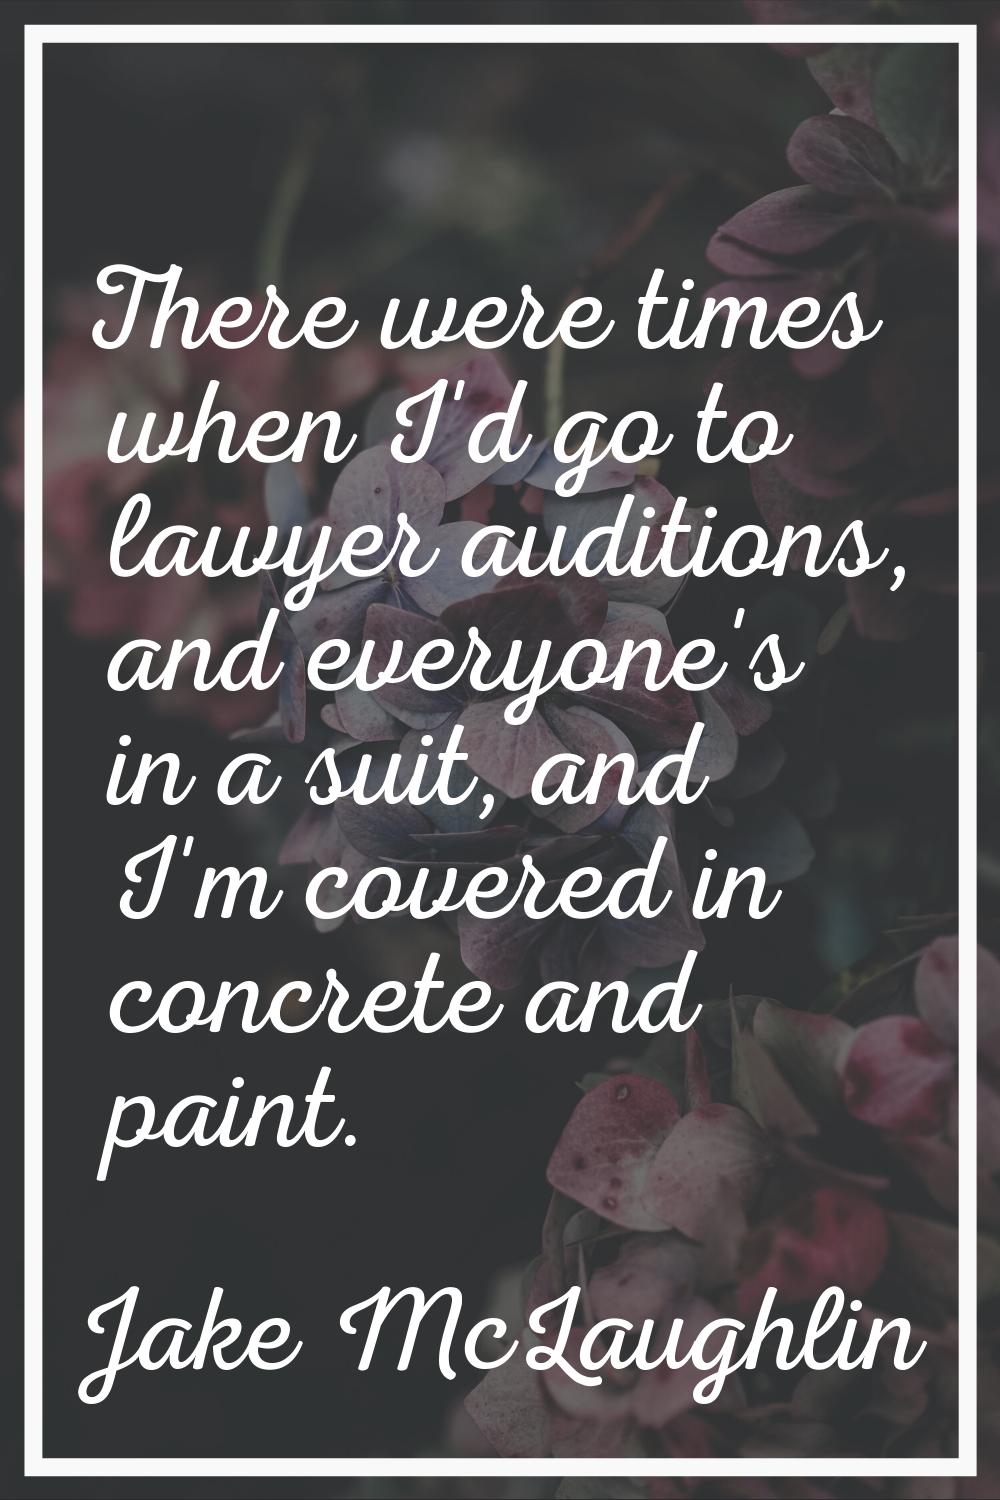 There were times when I'd go to lawyer auditions, and everyone's in a suit, and I'm covered in conc